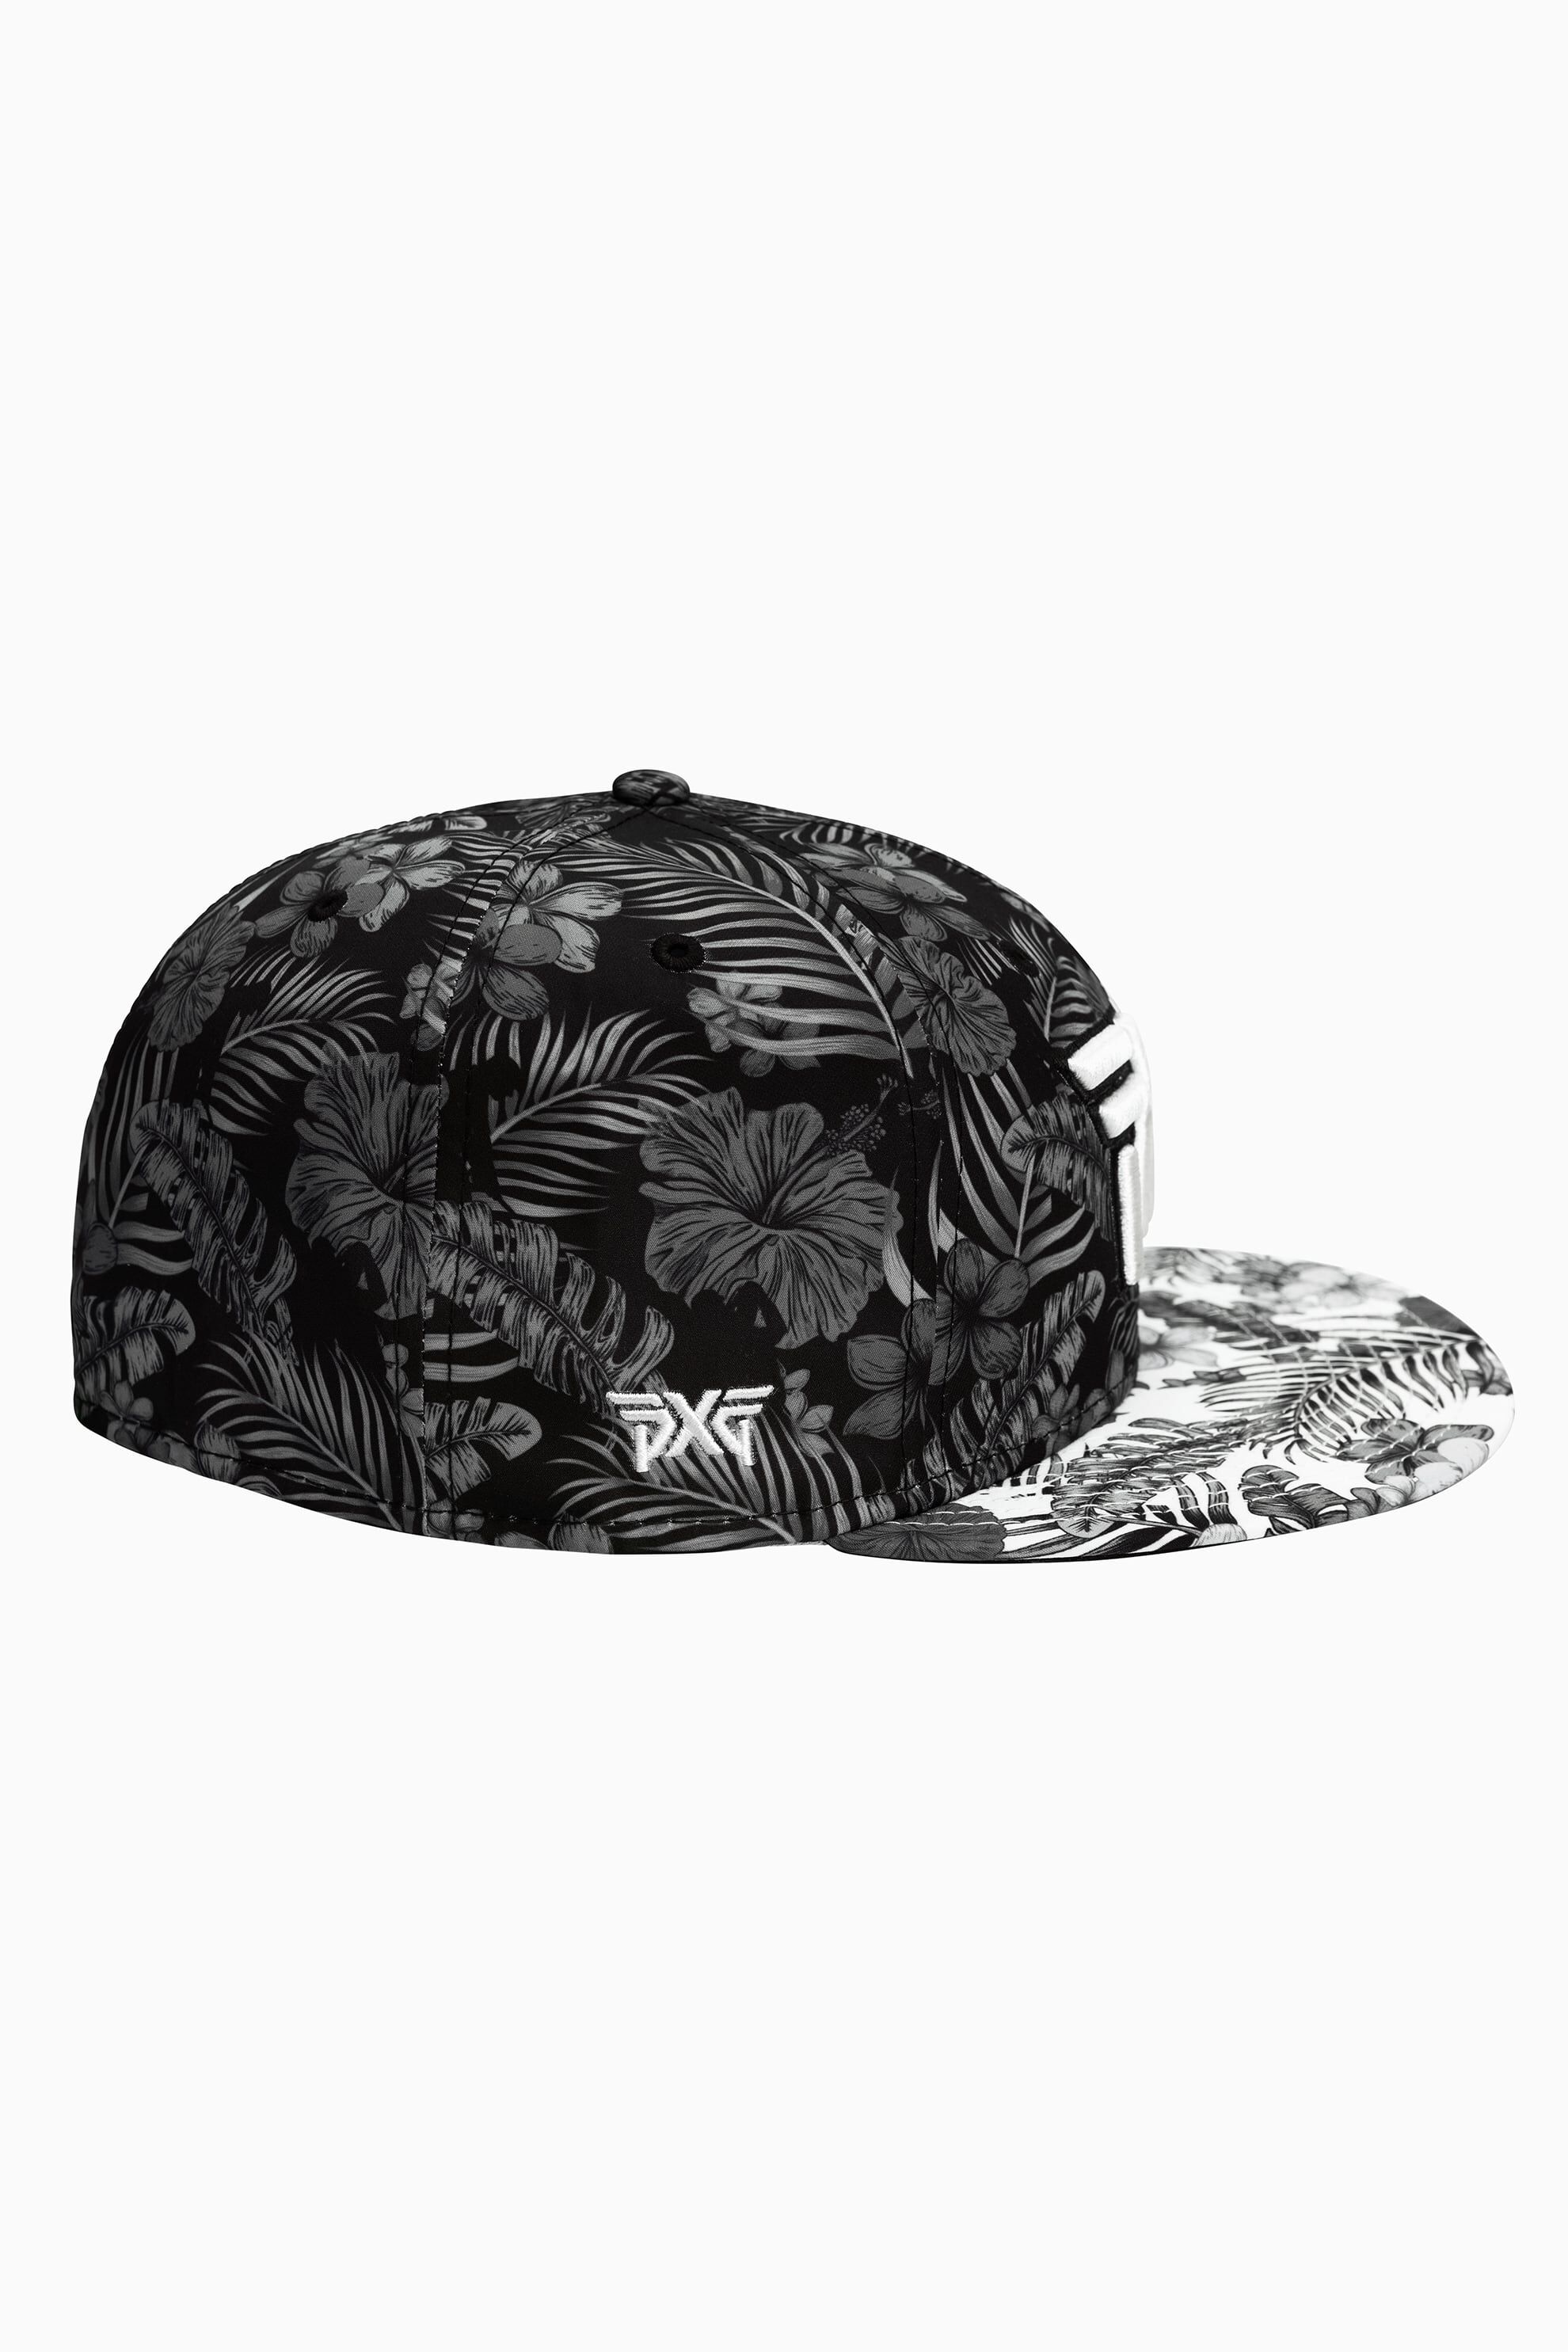 Buy Aloha 2022 59FIFTY Fitted Cap | PXG